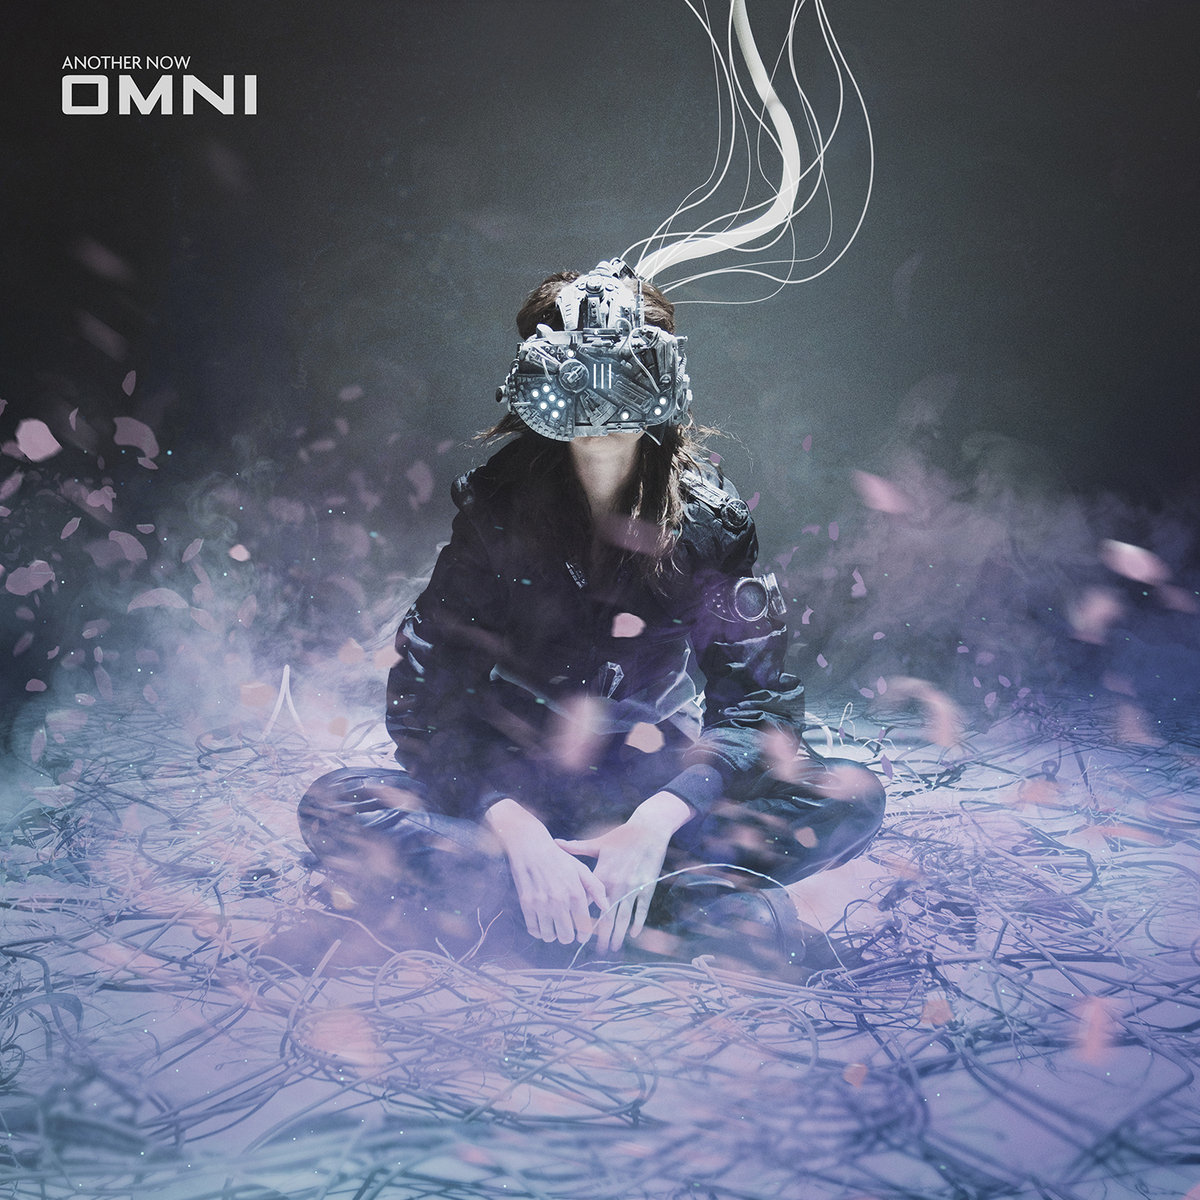 Another Now – OMNI